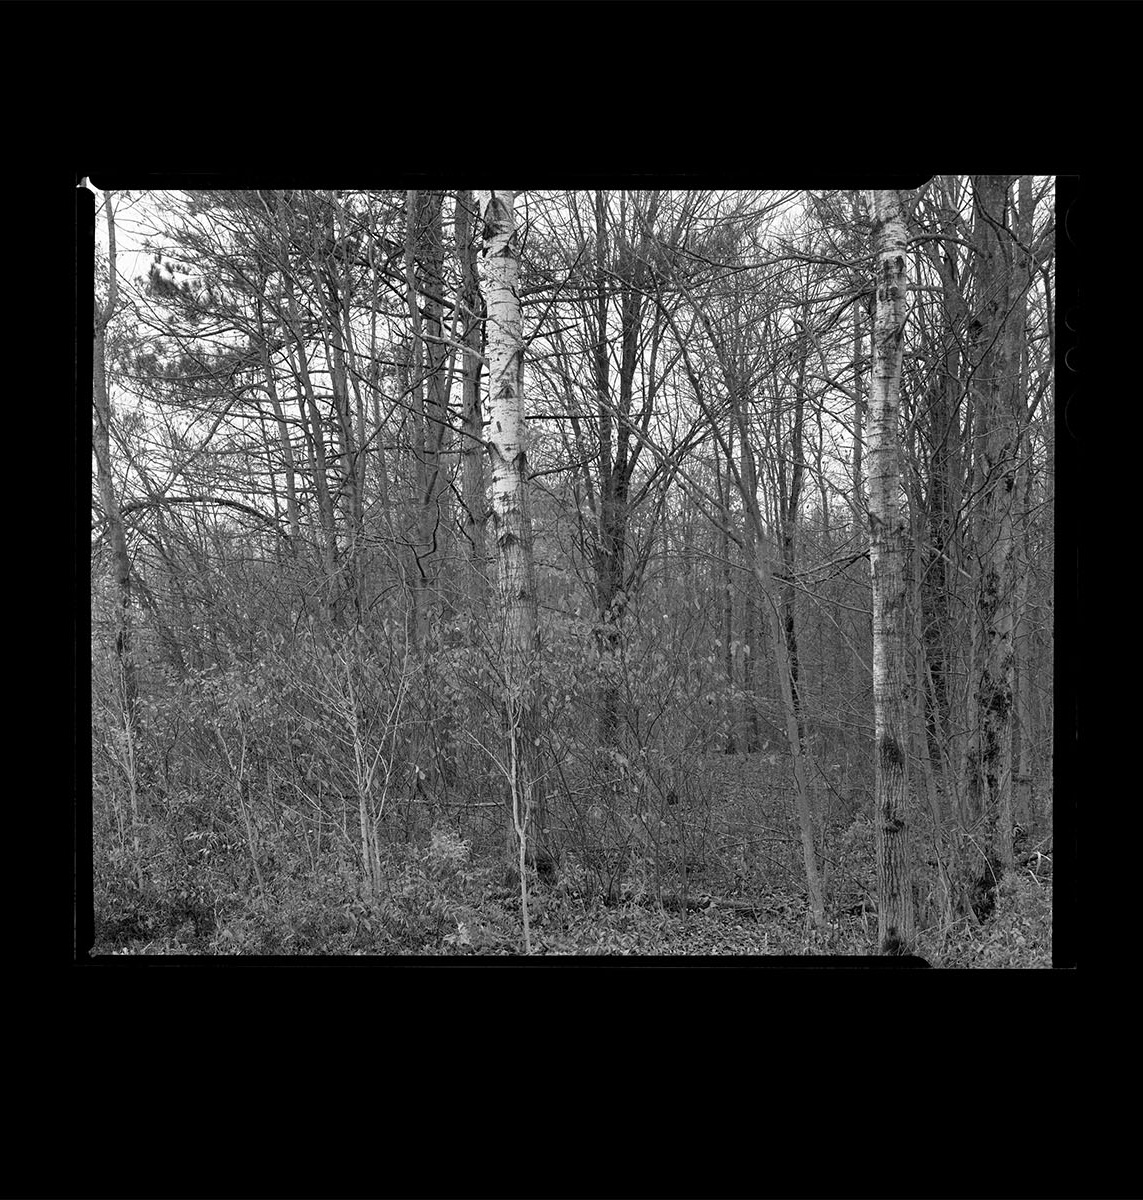 Image from One Year showing trees in black and white